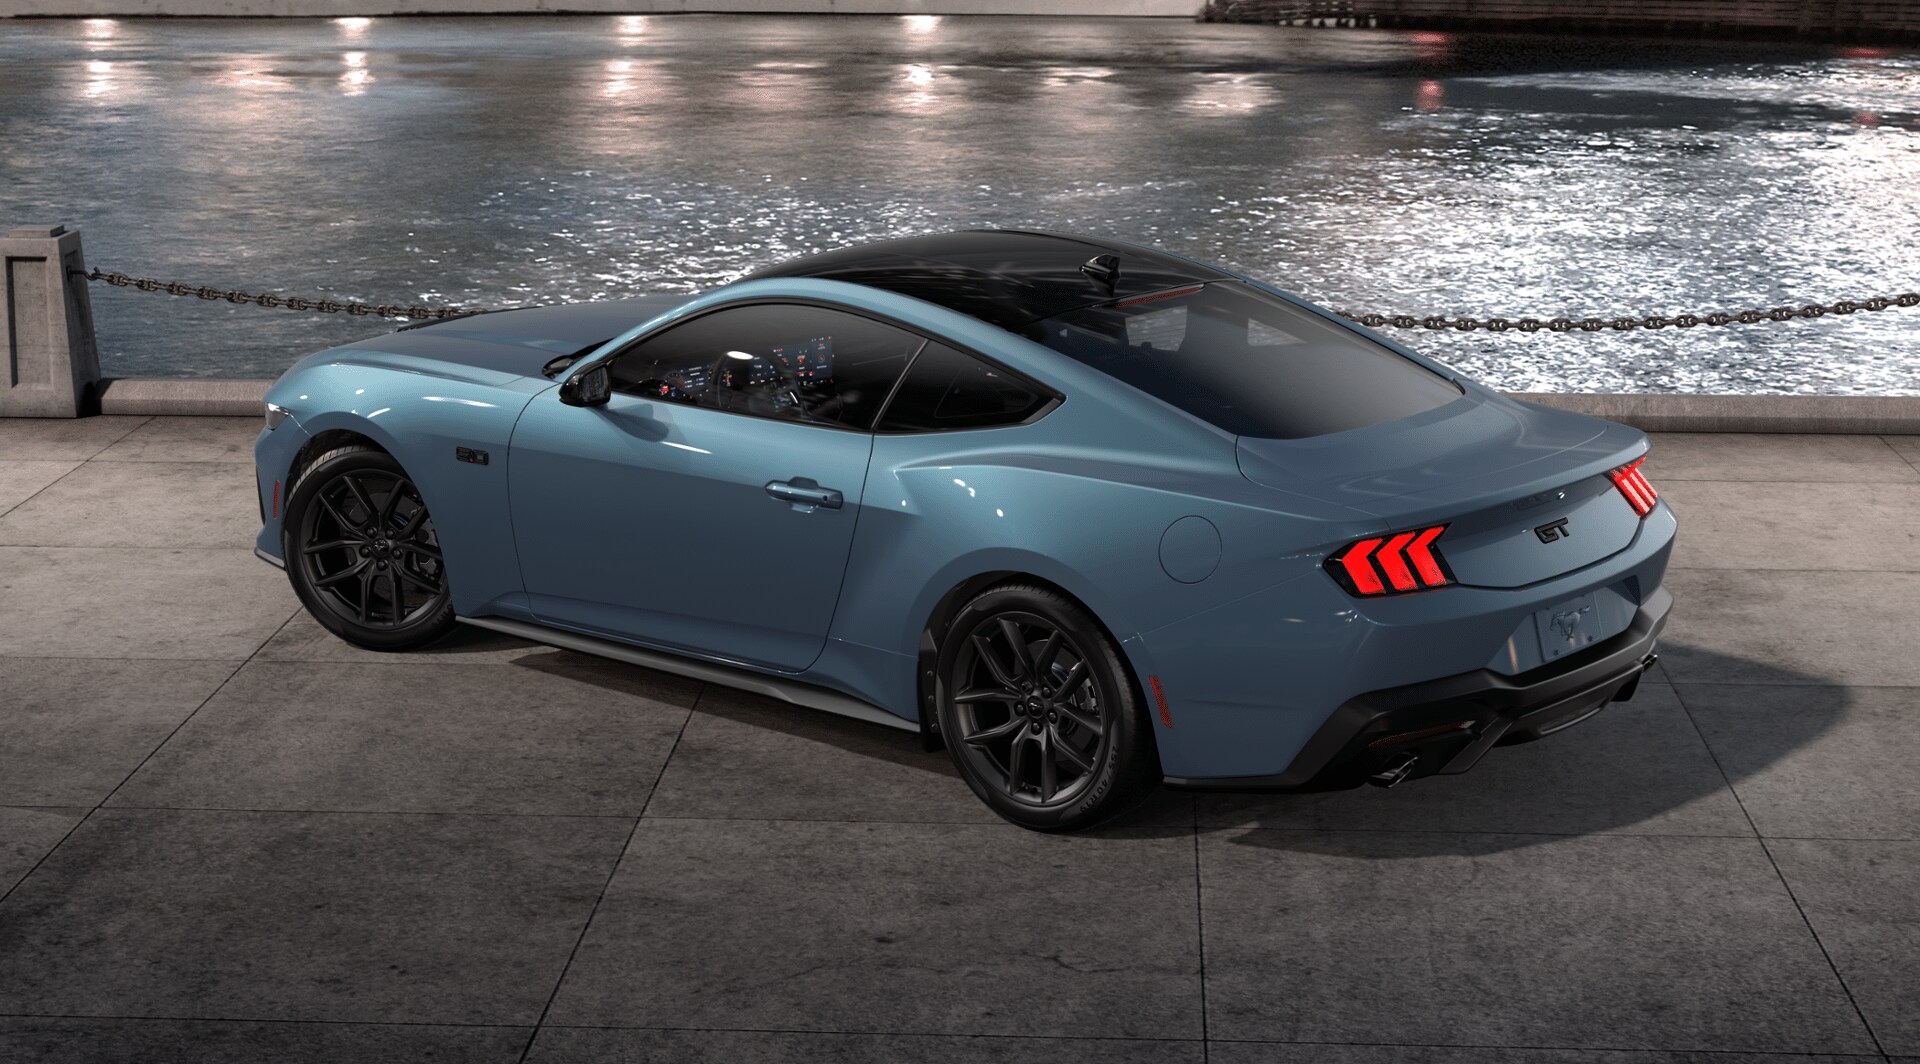 S650 Mustang 2024 Mustang Build & Price Configurator UPDATED!! [New Images] D6B342E3-44F3-41B4-8123-4846014EDADB